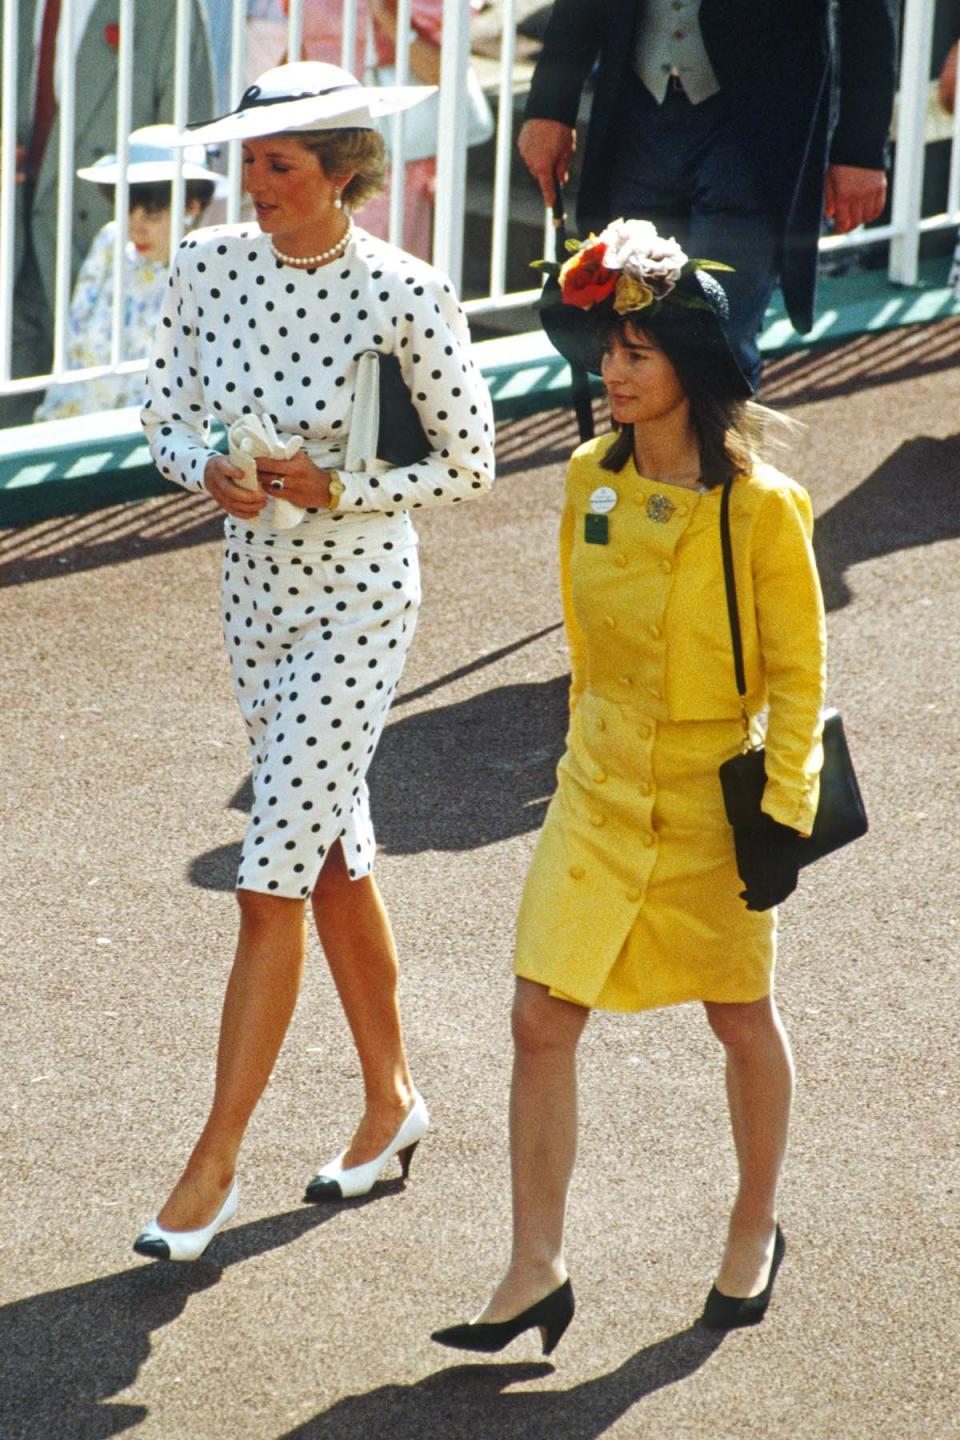 ASCOT, ENGLAND - JUNE 15: Diana, Princess of Wales, wearing a white dress with black polkadots designed by Victor Edelstein and a matching hat designed by Frederick Fox, attends Royal Ascot on June 15, 1988 in Ascot, United Kingdom. (Photo by Anwar Hussein/Getty Images)